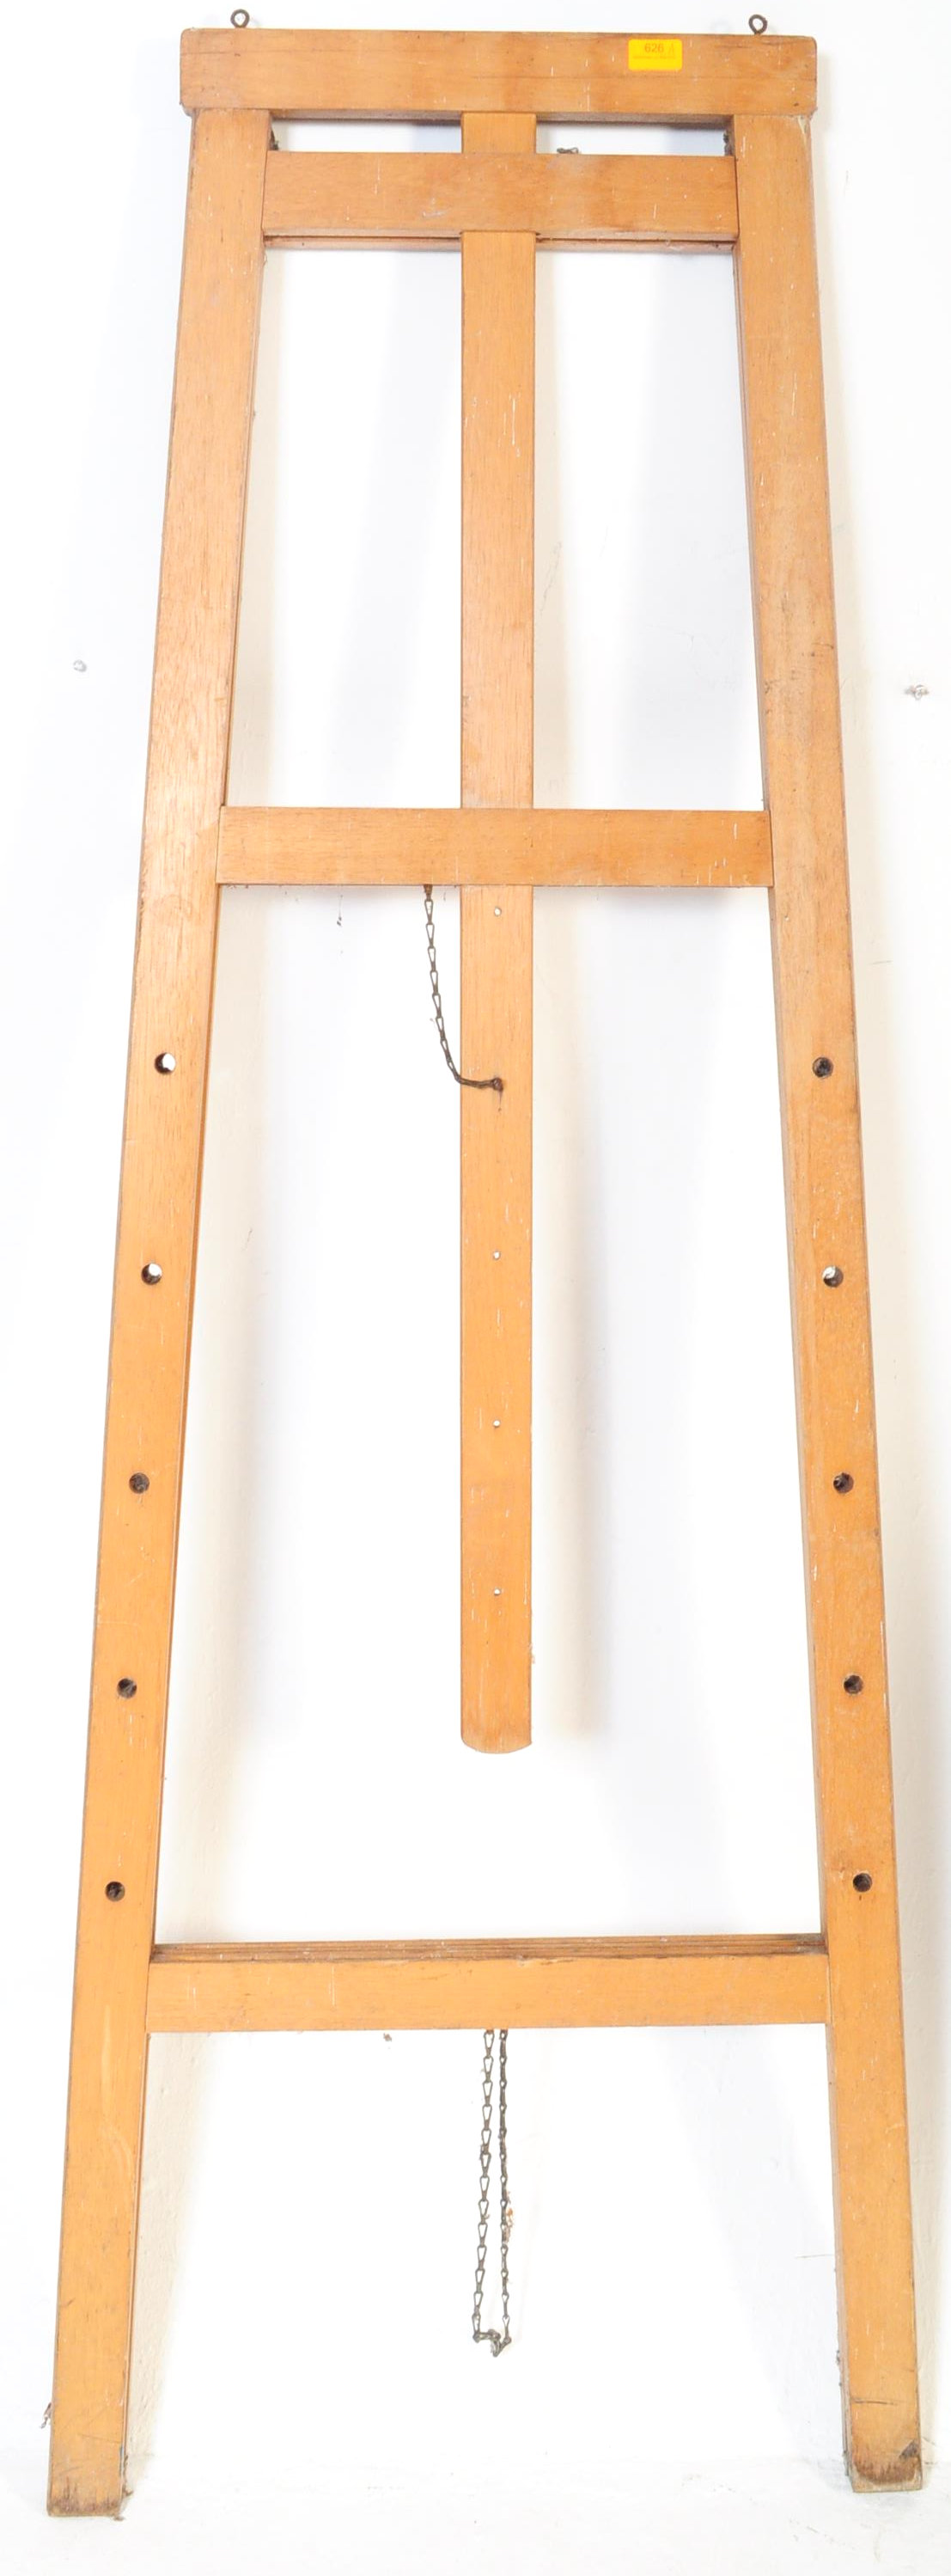 A LARGE VINTAGE RETRO 1970'S BEECH WOOD ARTIST EASEL - Image 5 of 5